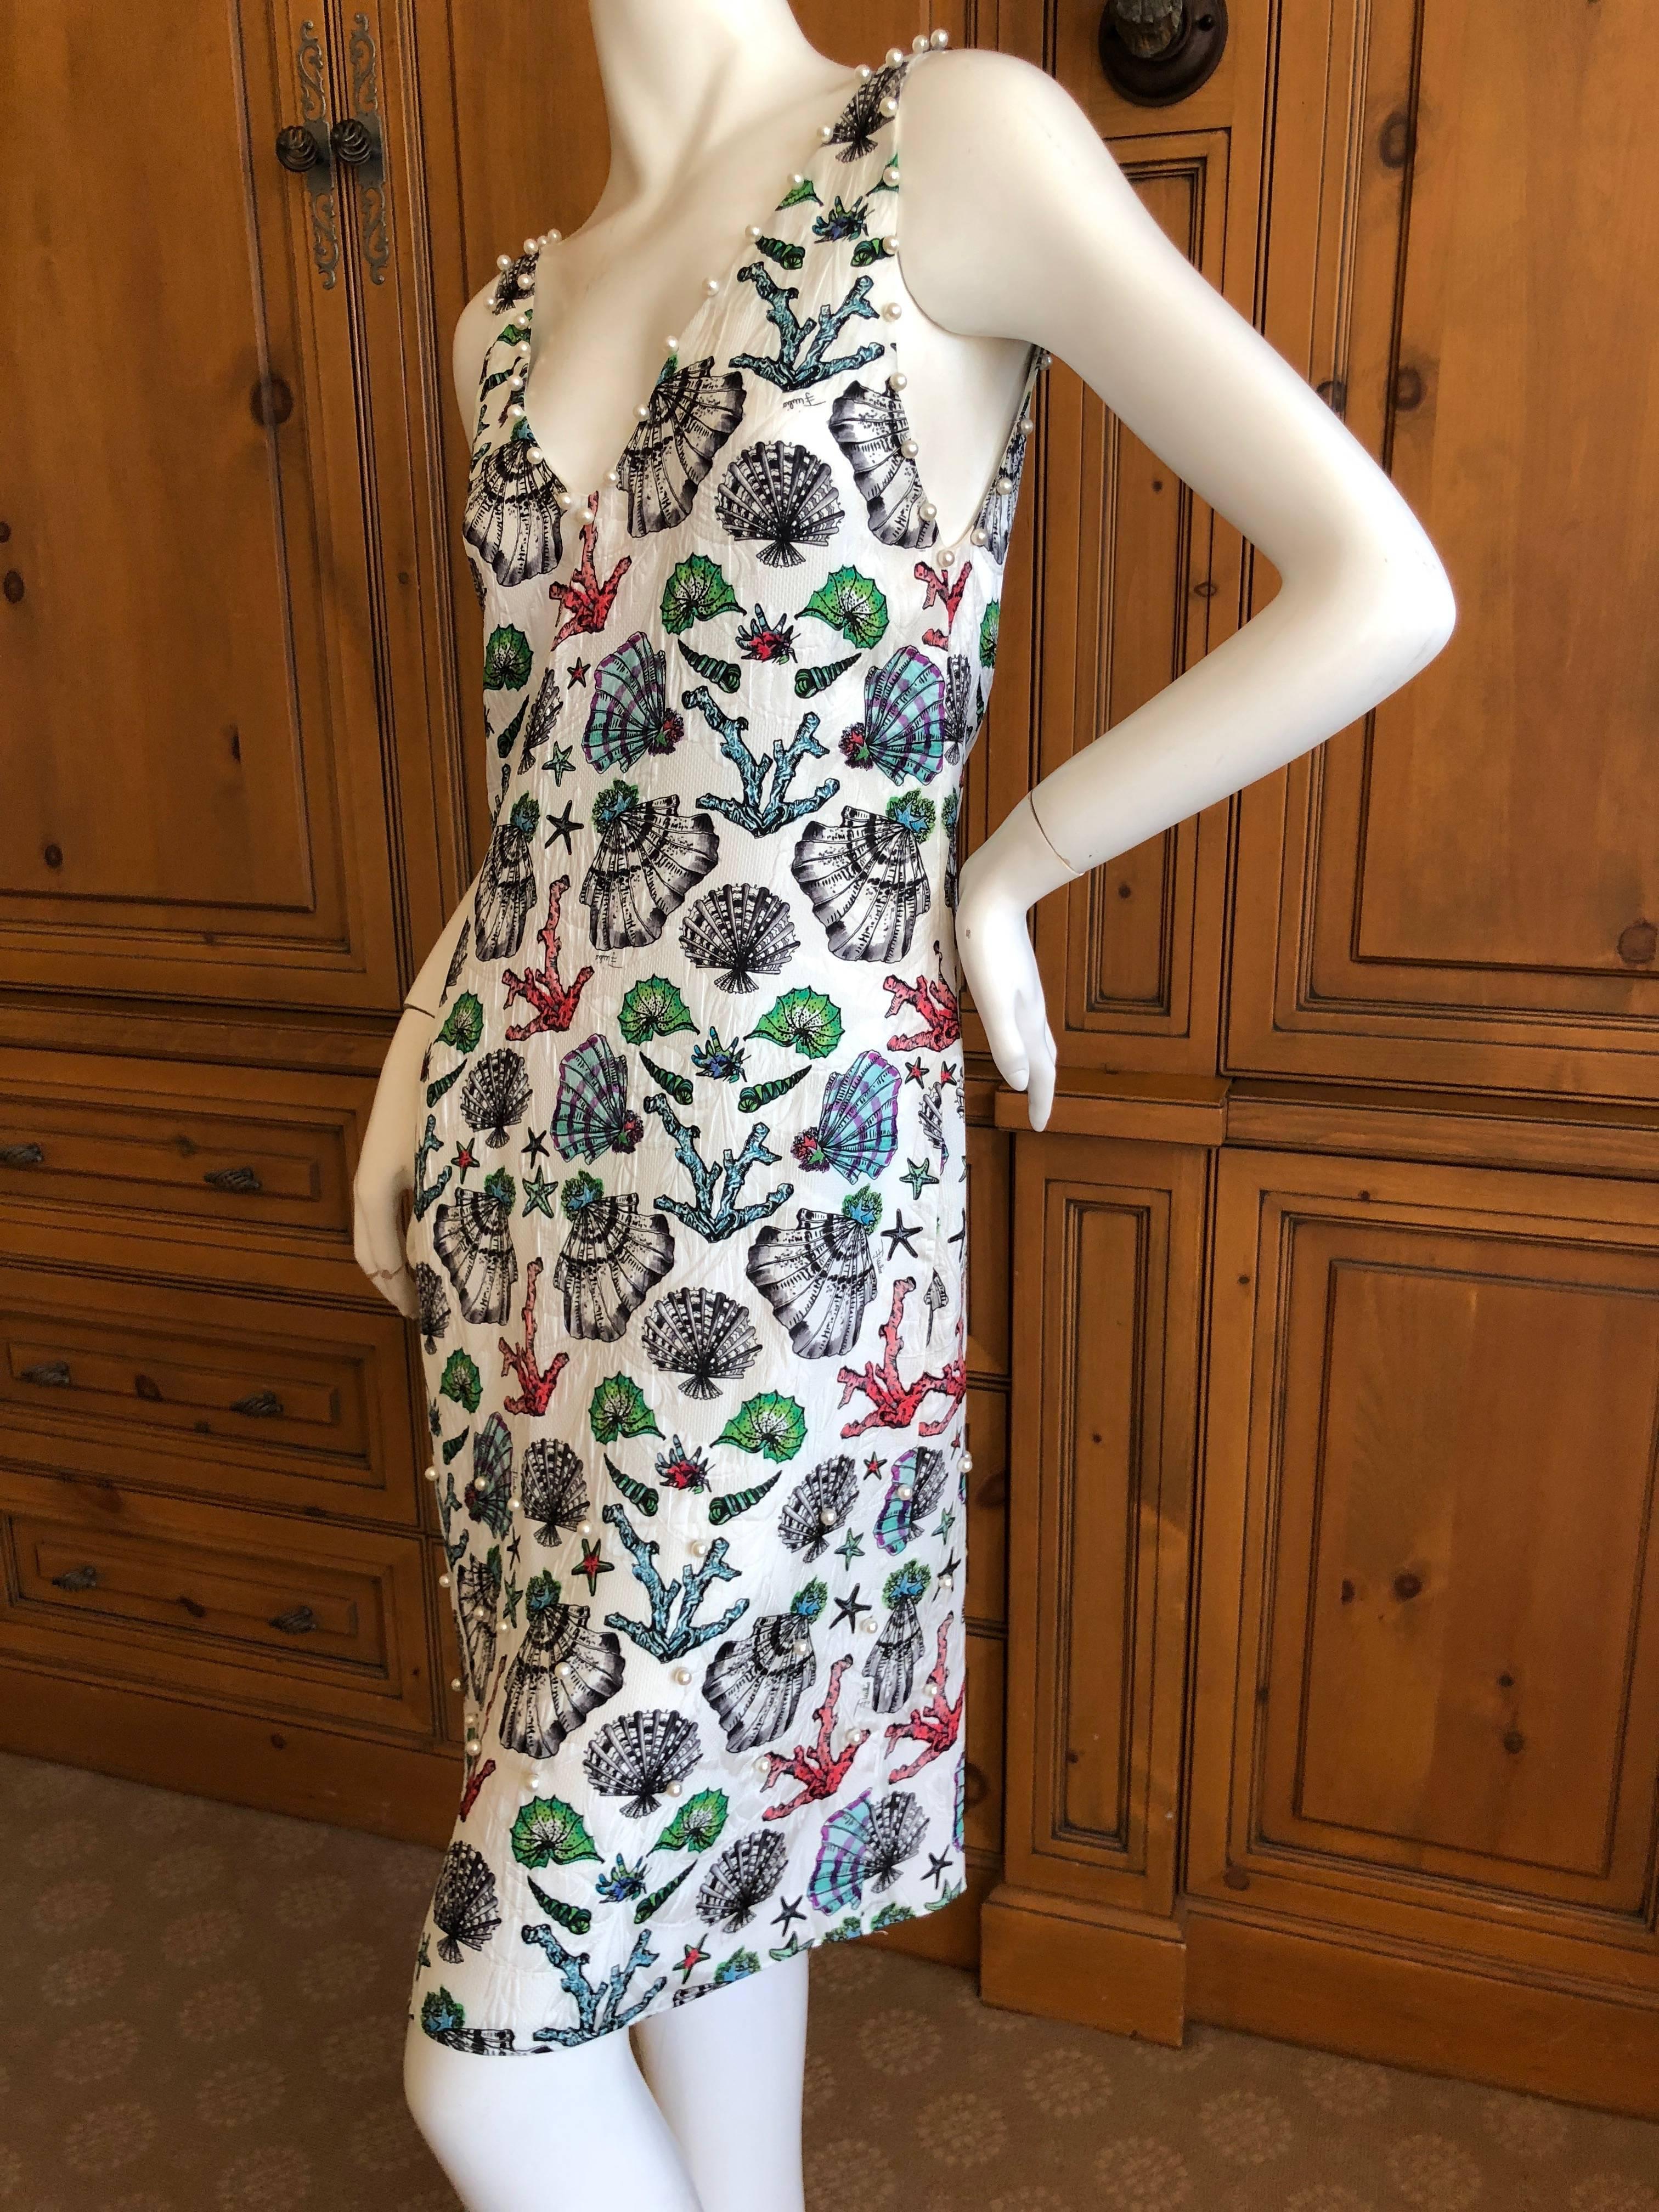 Emilio Pucci Sweet Pearl Trim Silk Seashell Print Day Dress
 This is so sweet.

Size 40
 Bust 36